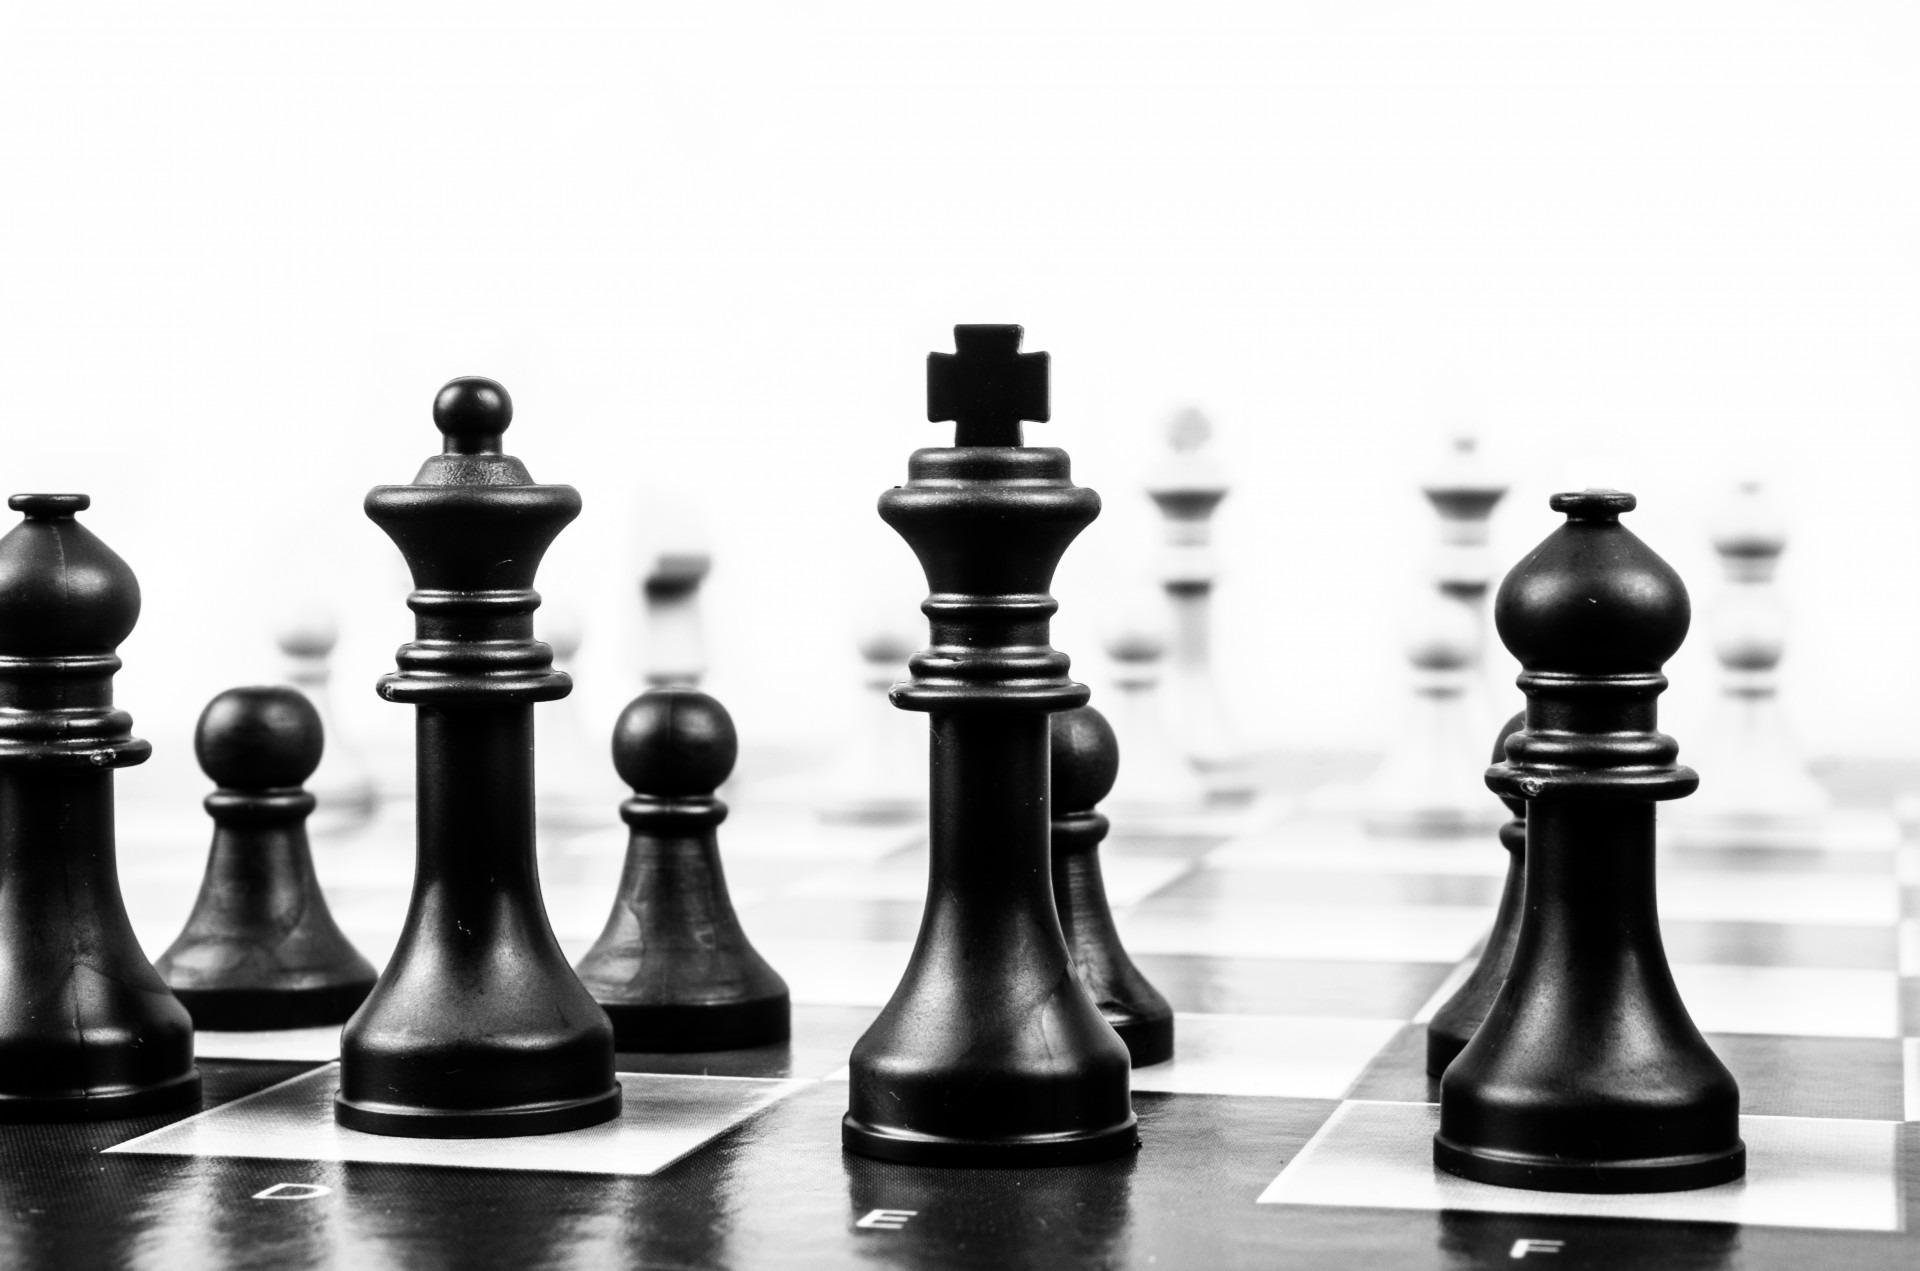 Consulting: Are you a strategist or a tactician?